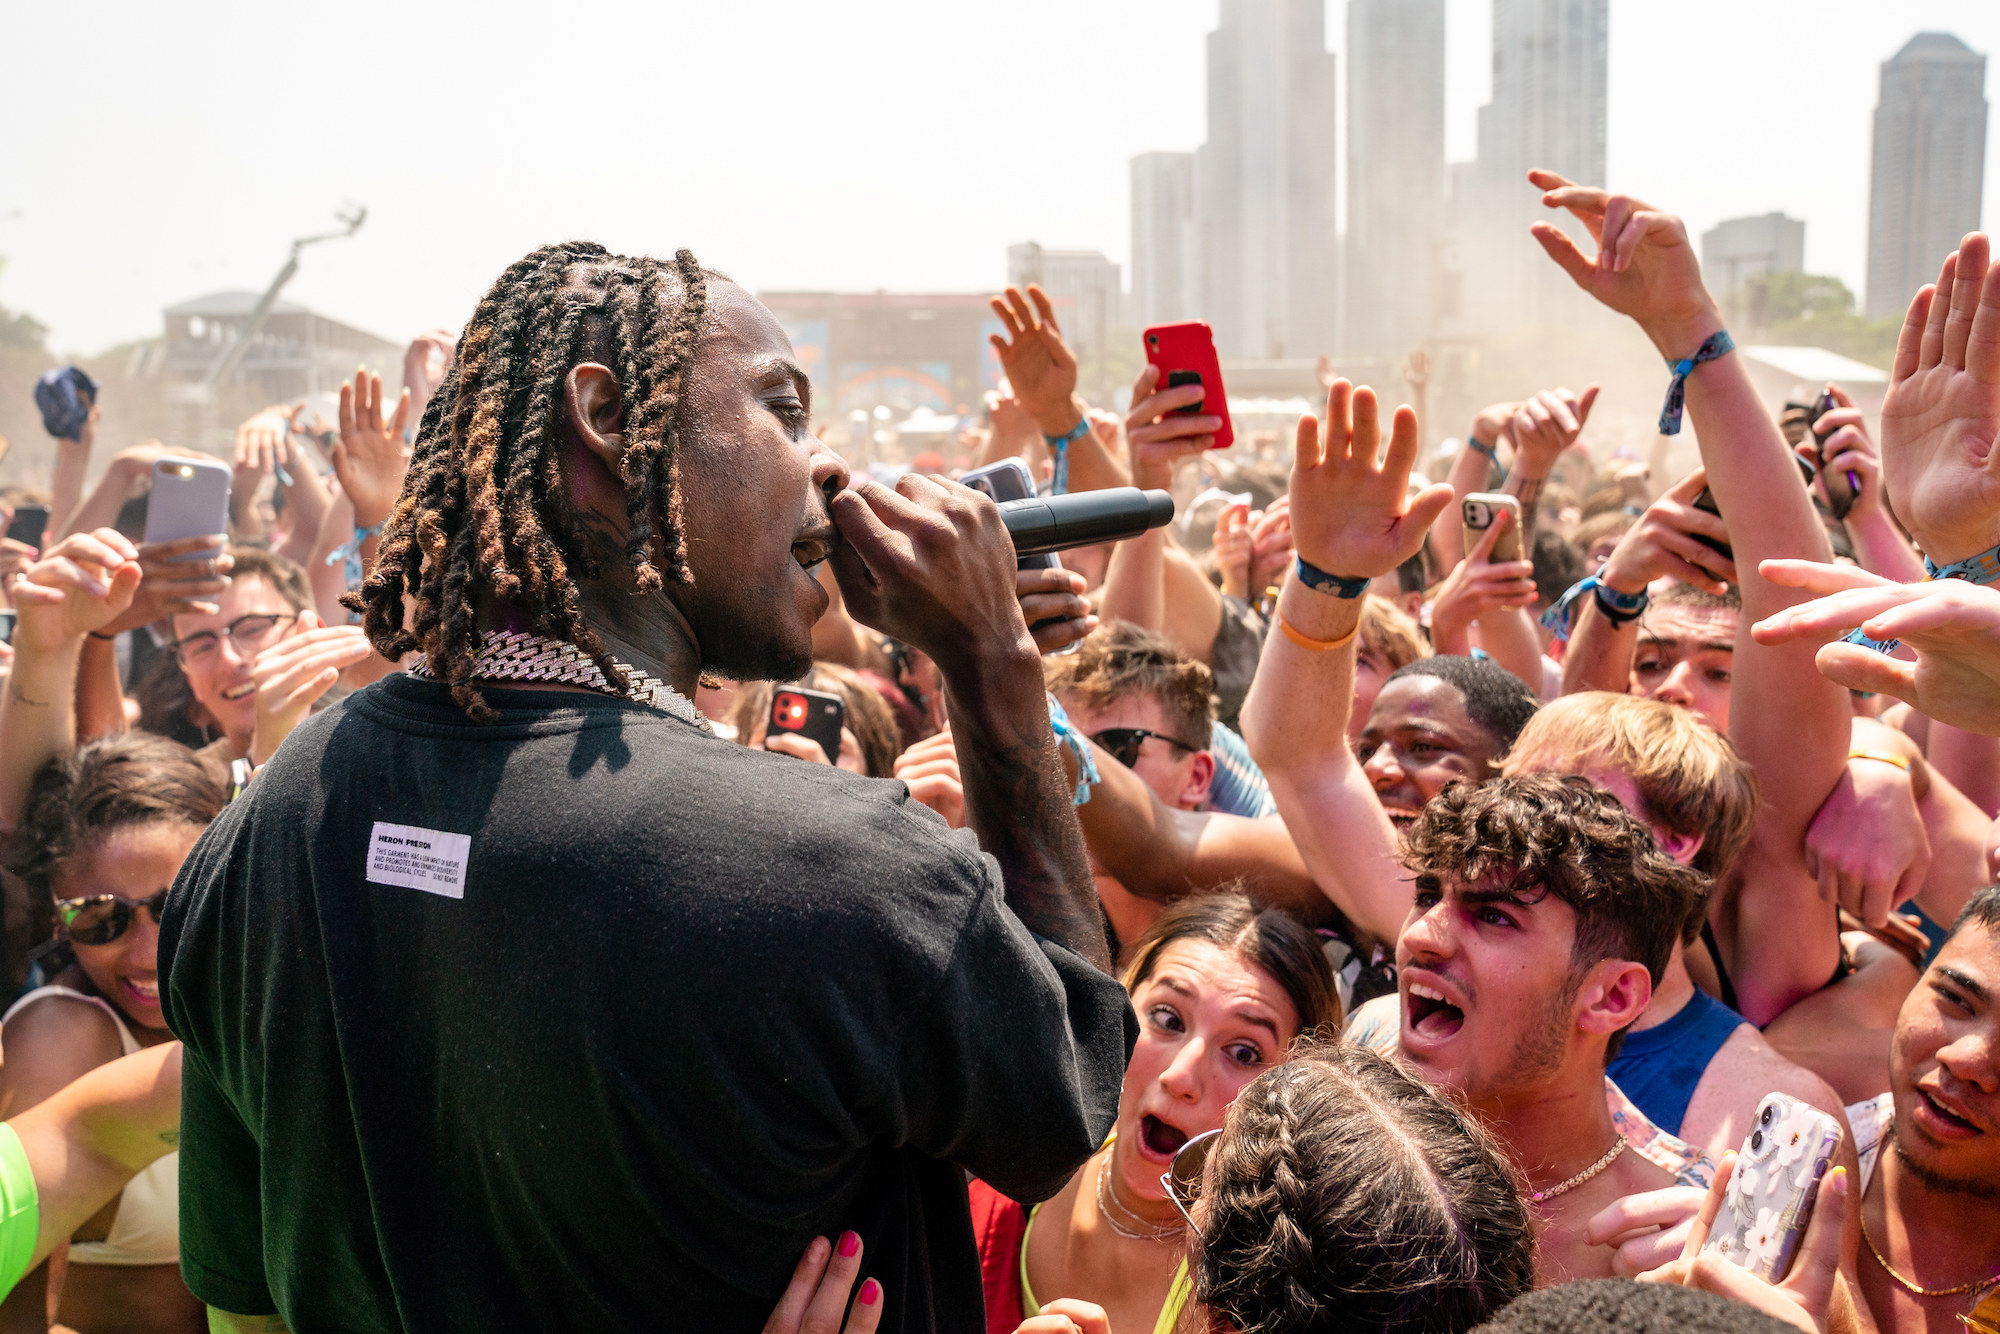 Musician Flipp Dinero sings to an enthusiastic group of young people at Lollapalooza.